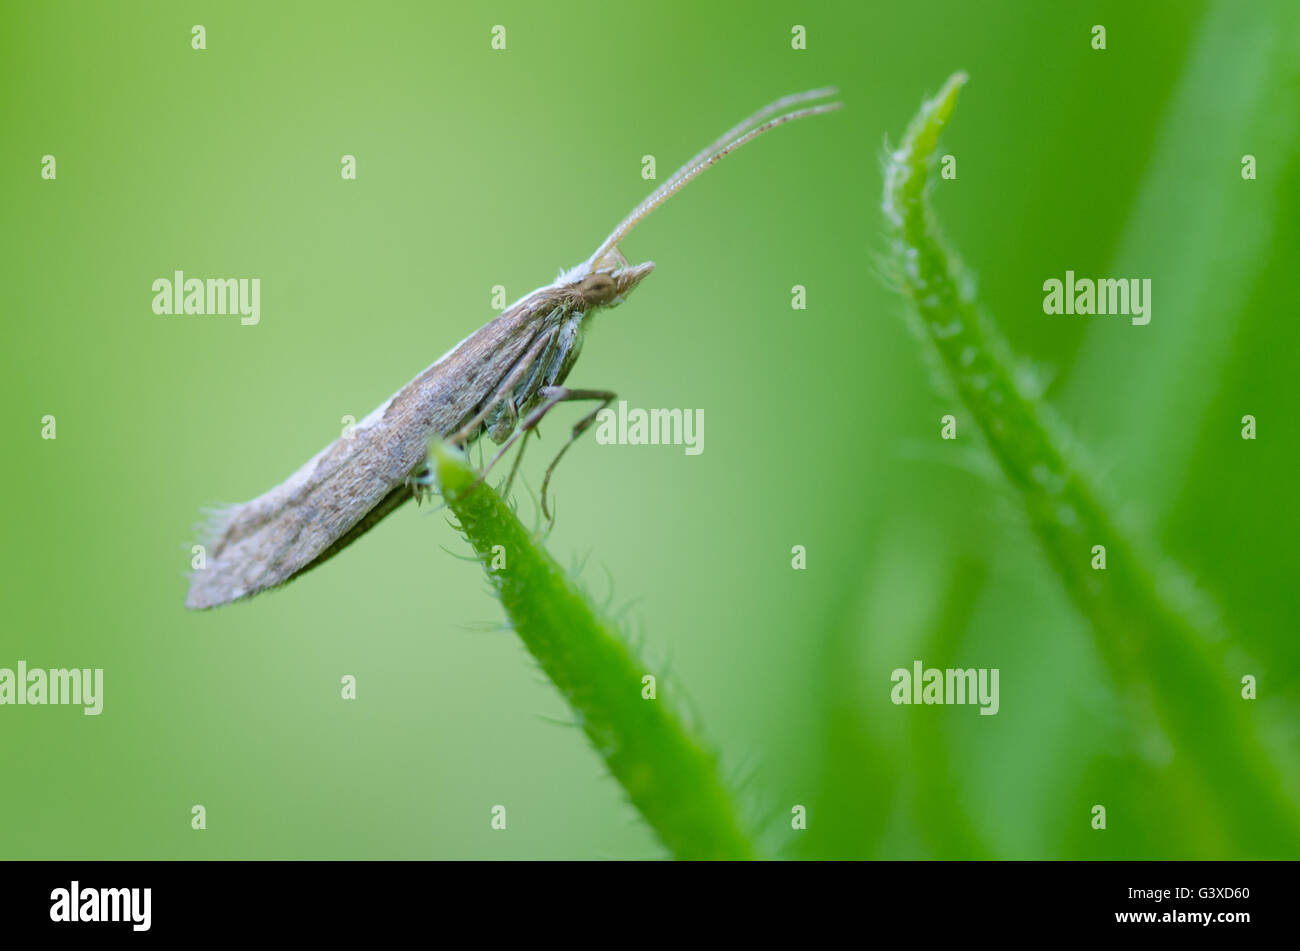 Diamond-back moth (Plutella xylostella). Migratory insect in the family Plutellidae, known as a pest of vegetable crops Stock Photo